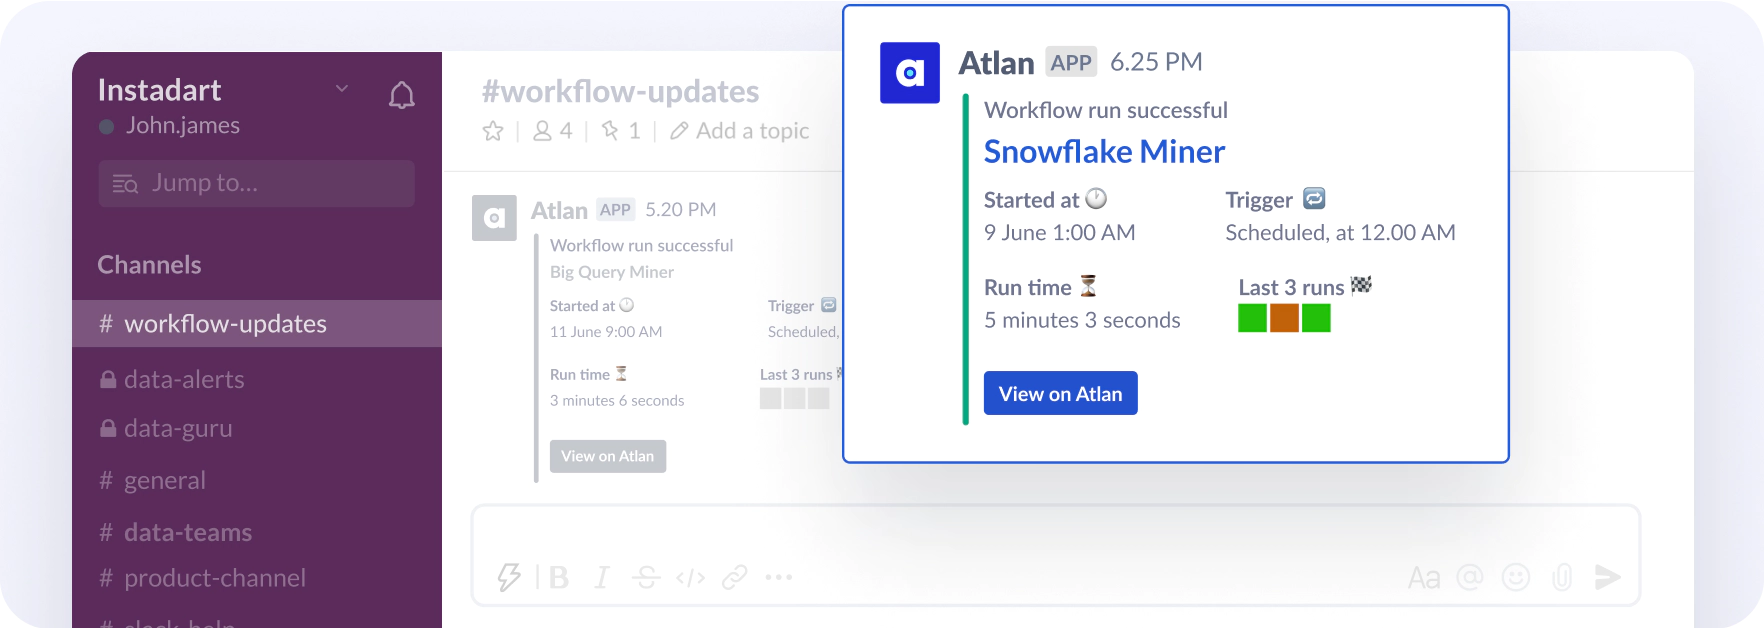 Snowflake metadata use case: Embedded collaboration with data assets and team members in the tools you are familiar with. Source: Atlan